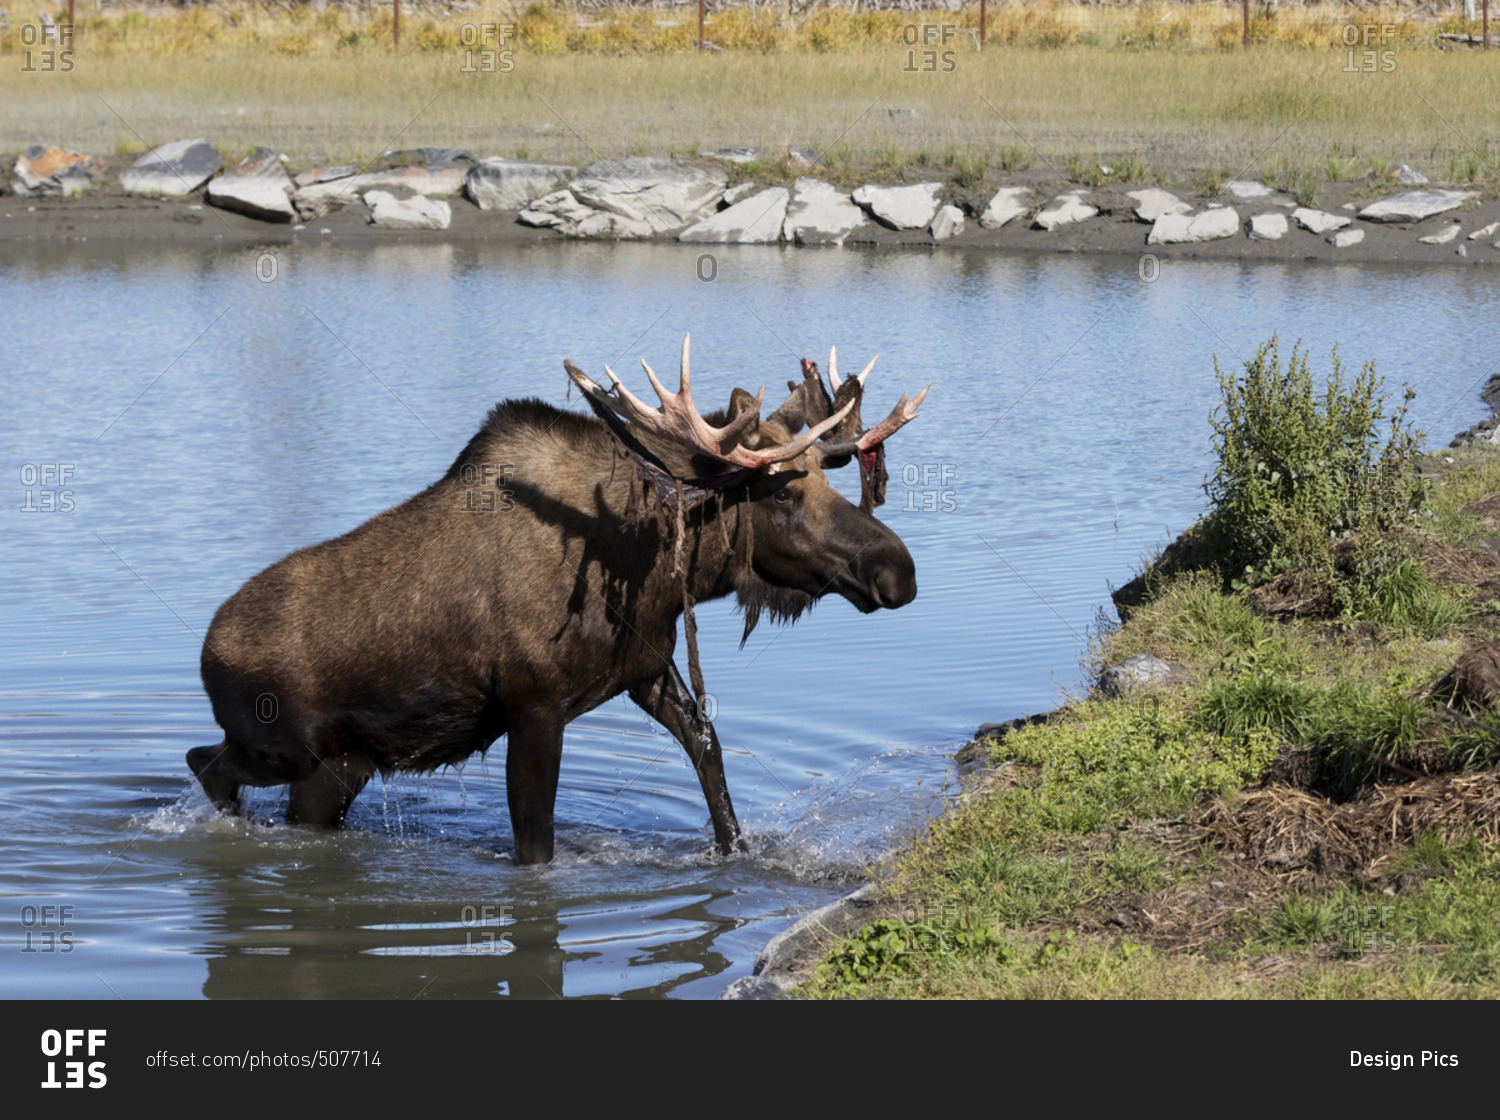 Bull moose (alces alces) coming out of the water, just coming out of shedding its velvet and antlers look a little red, captive at the Alaska Wildlife Conservation Centre; Portage, Alaska, United States of America